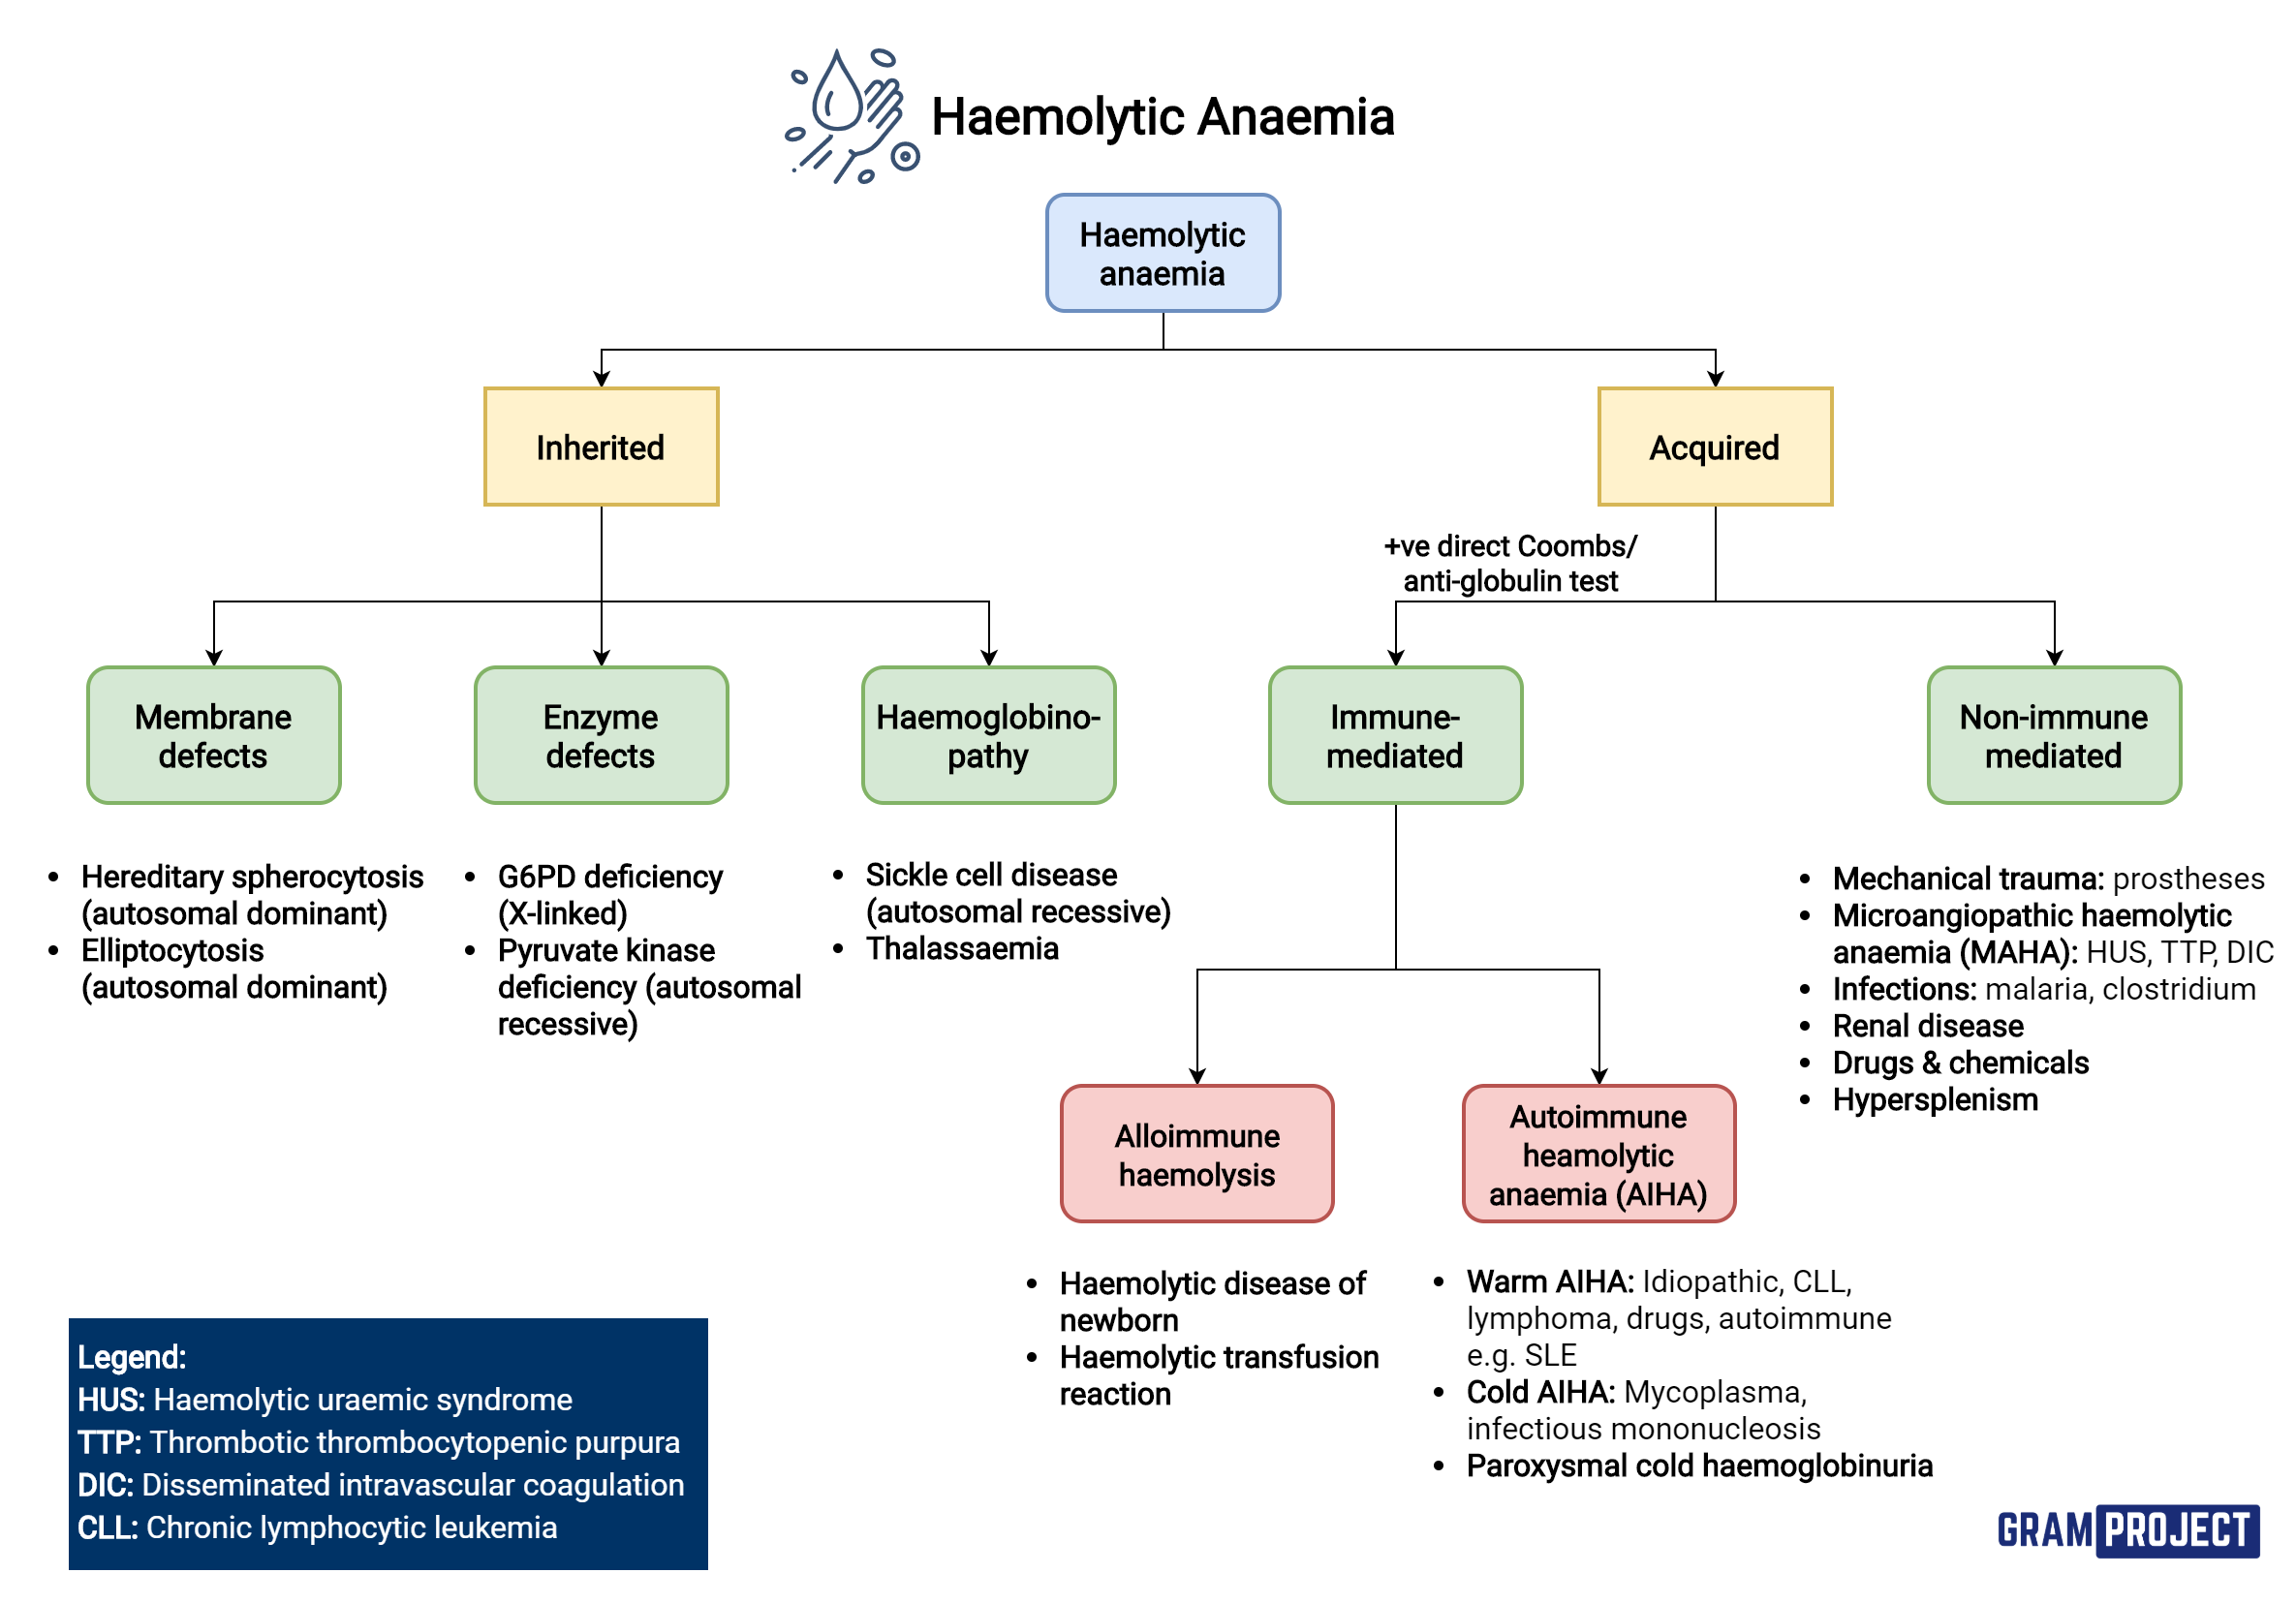 Summary flowchart of types of haemolytic anaemia and their causes.